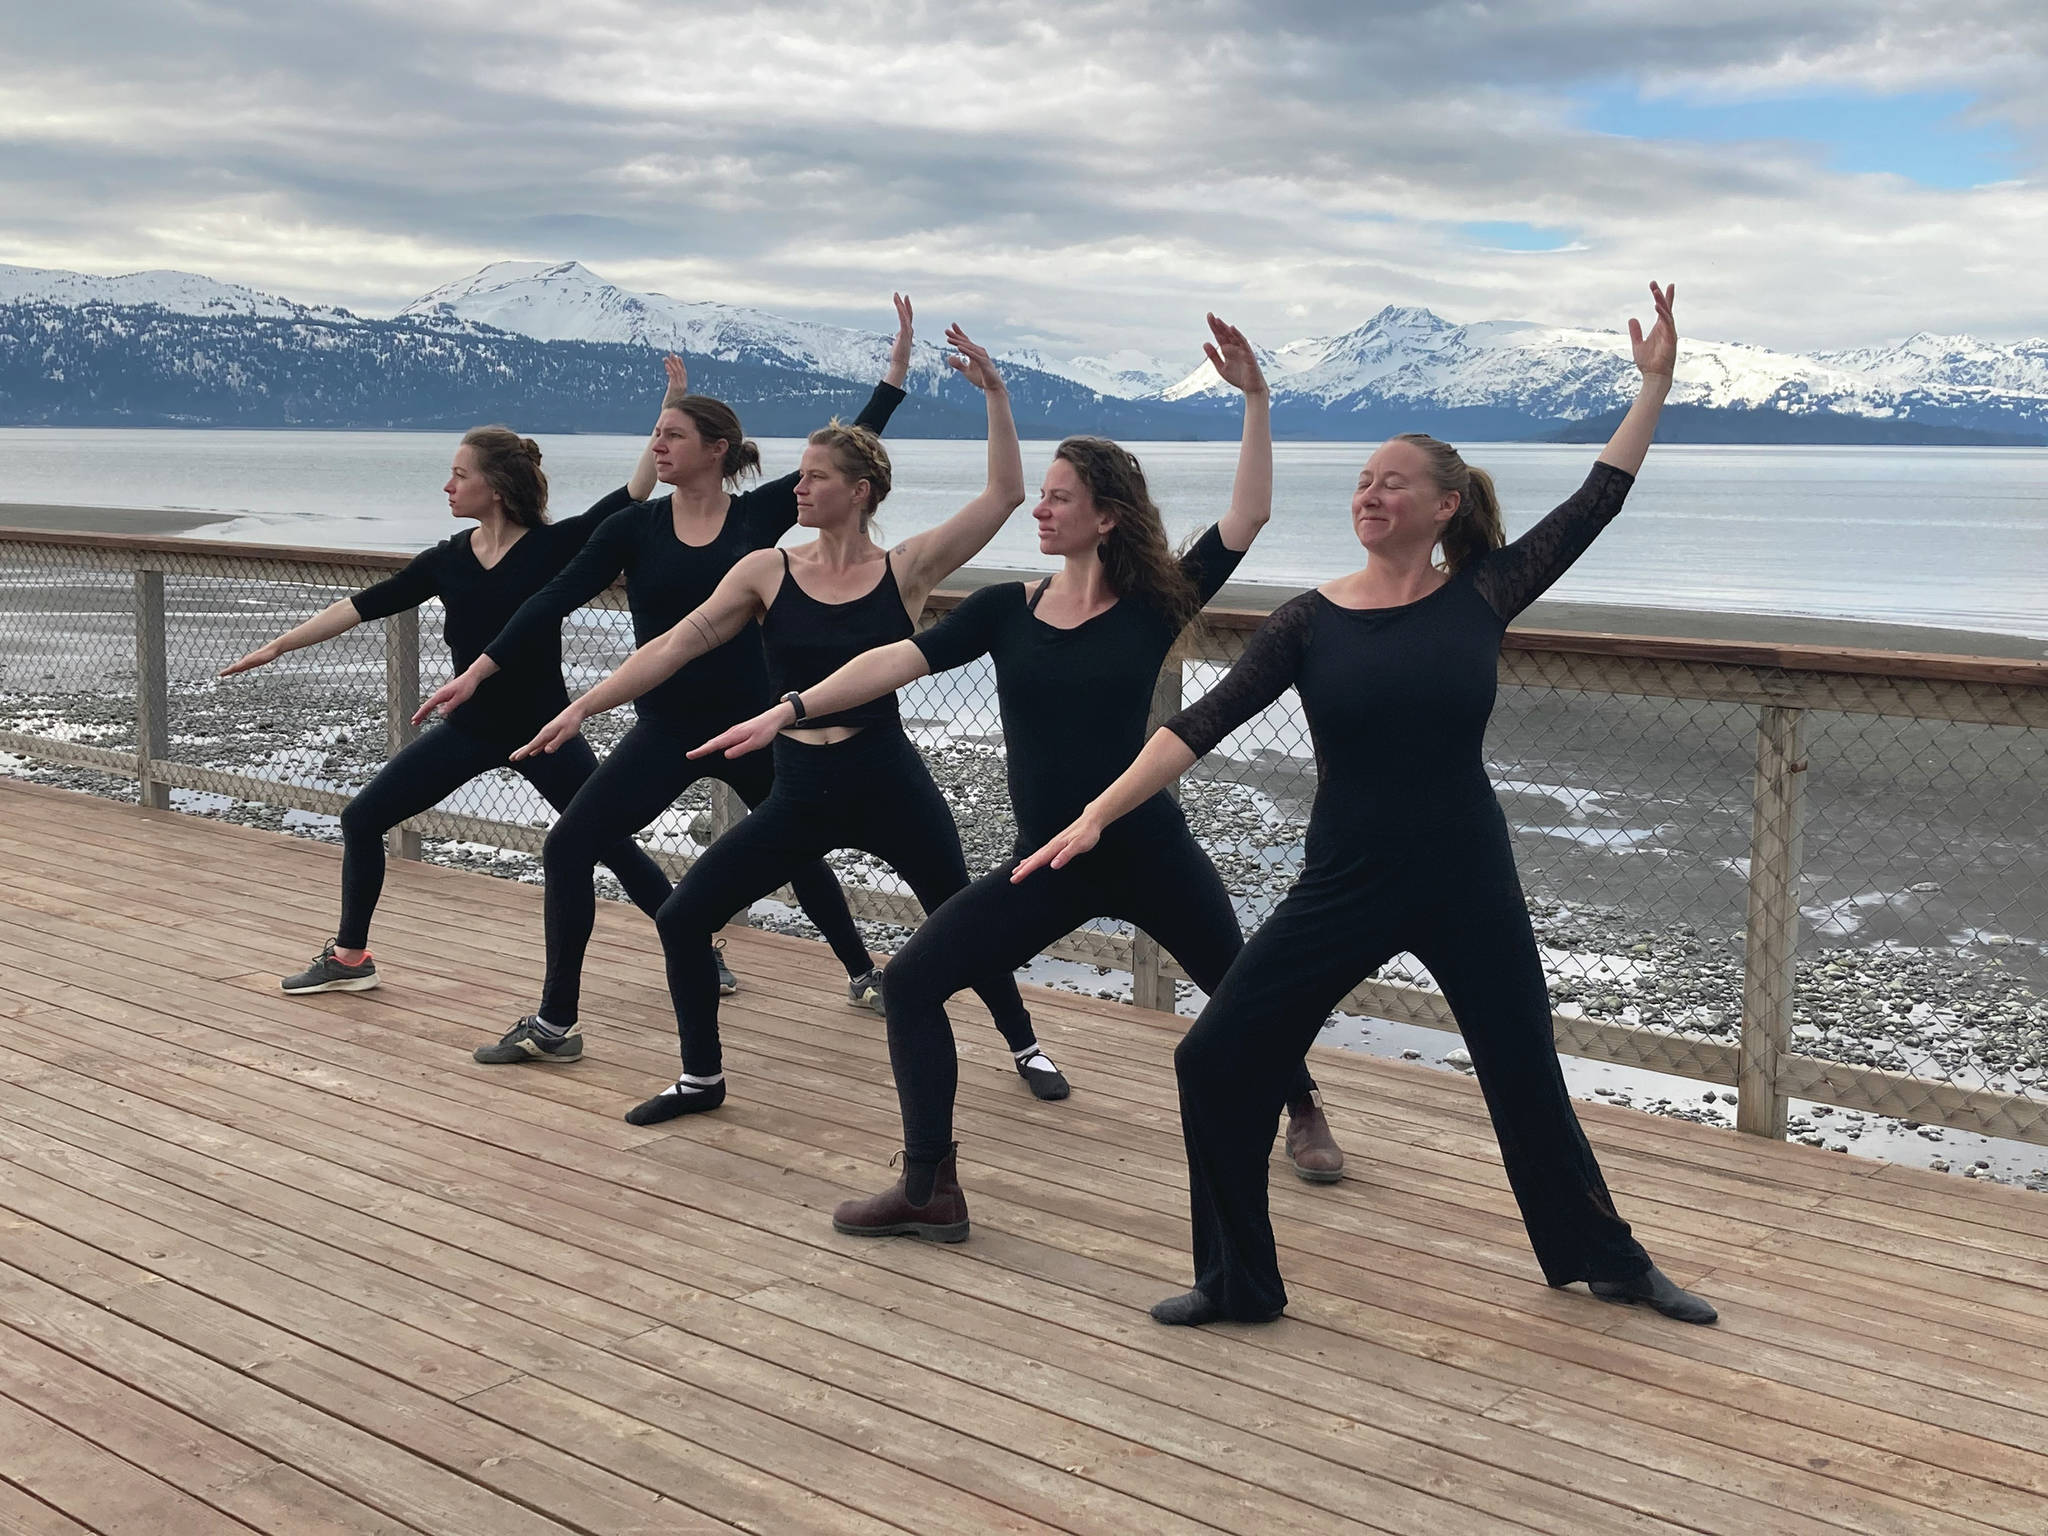 Members of the Motivity Dance Collective rehearse at the Kachemak Shellfish Growers Association deck in Homer, Alaska. From left to right, Emily Rogers, Emilie Springer, Bridget Doran, Rhoslyn Anderson, Breezy Berryman. Not pictured is Kammi Matson. (Photo by Kammi Matson)